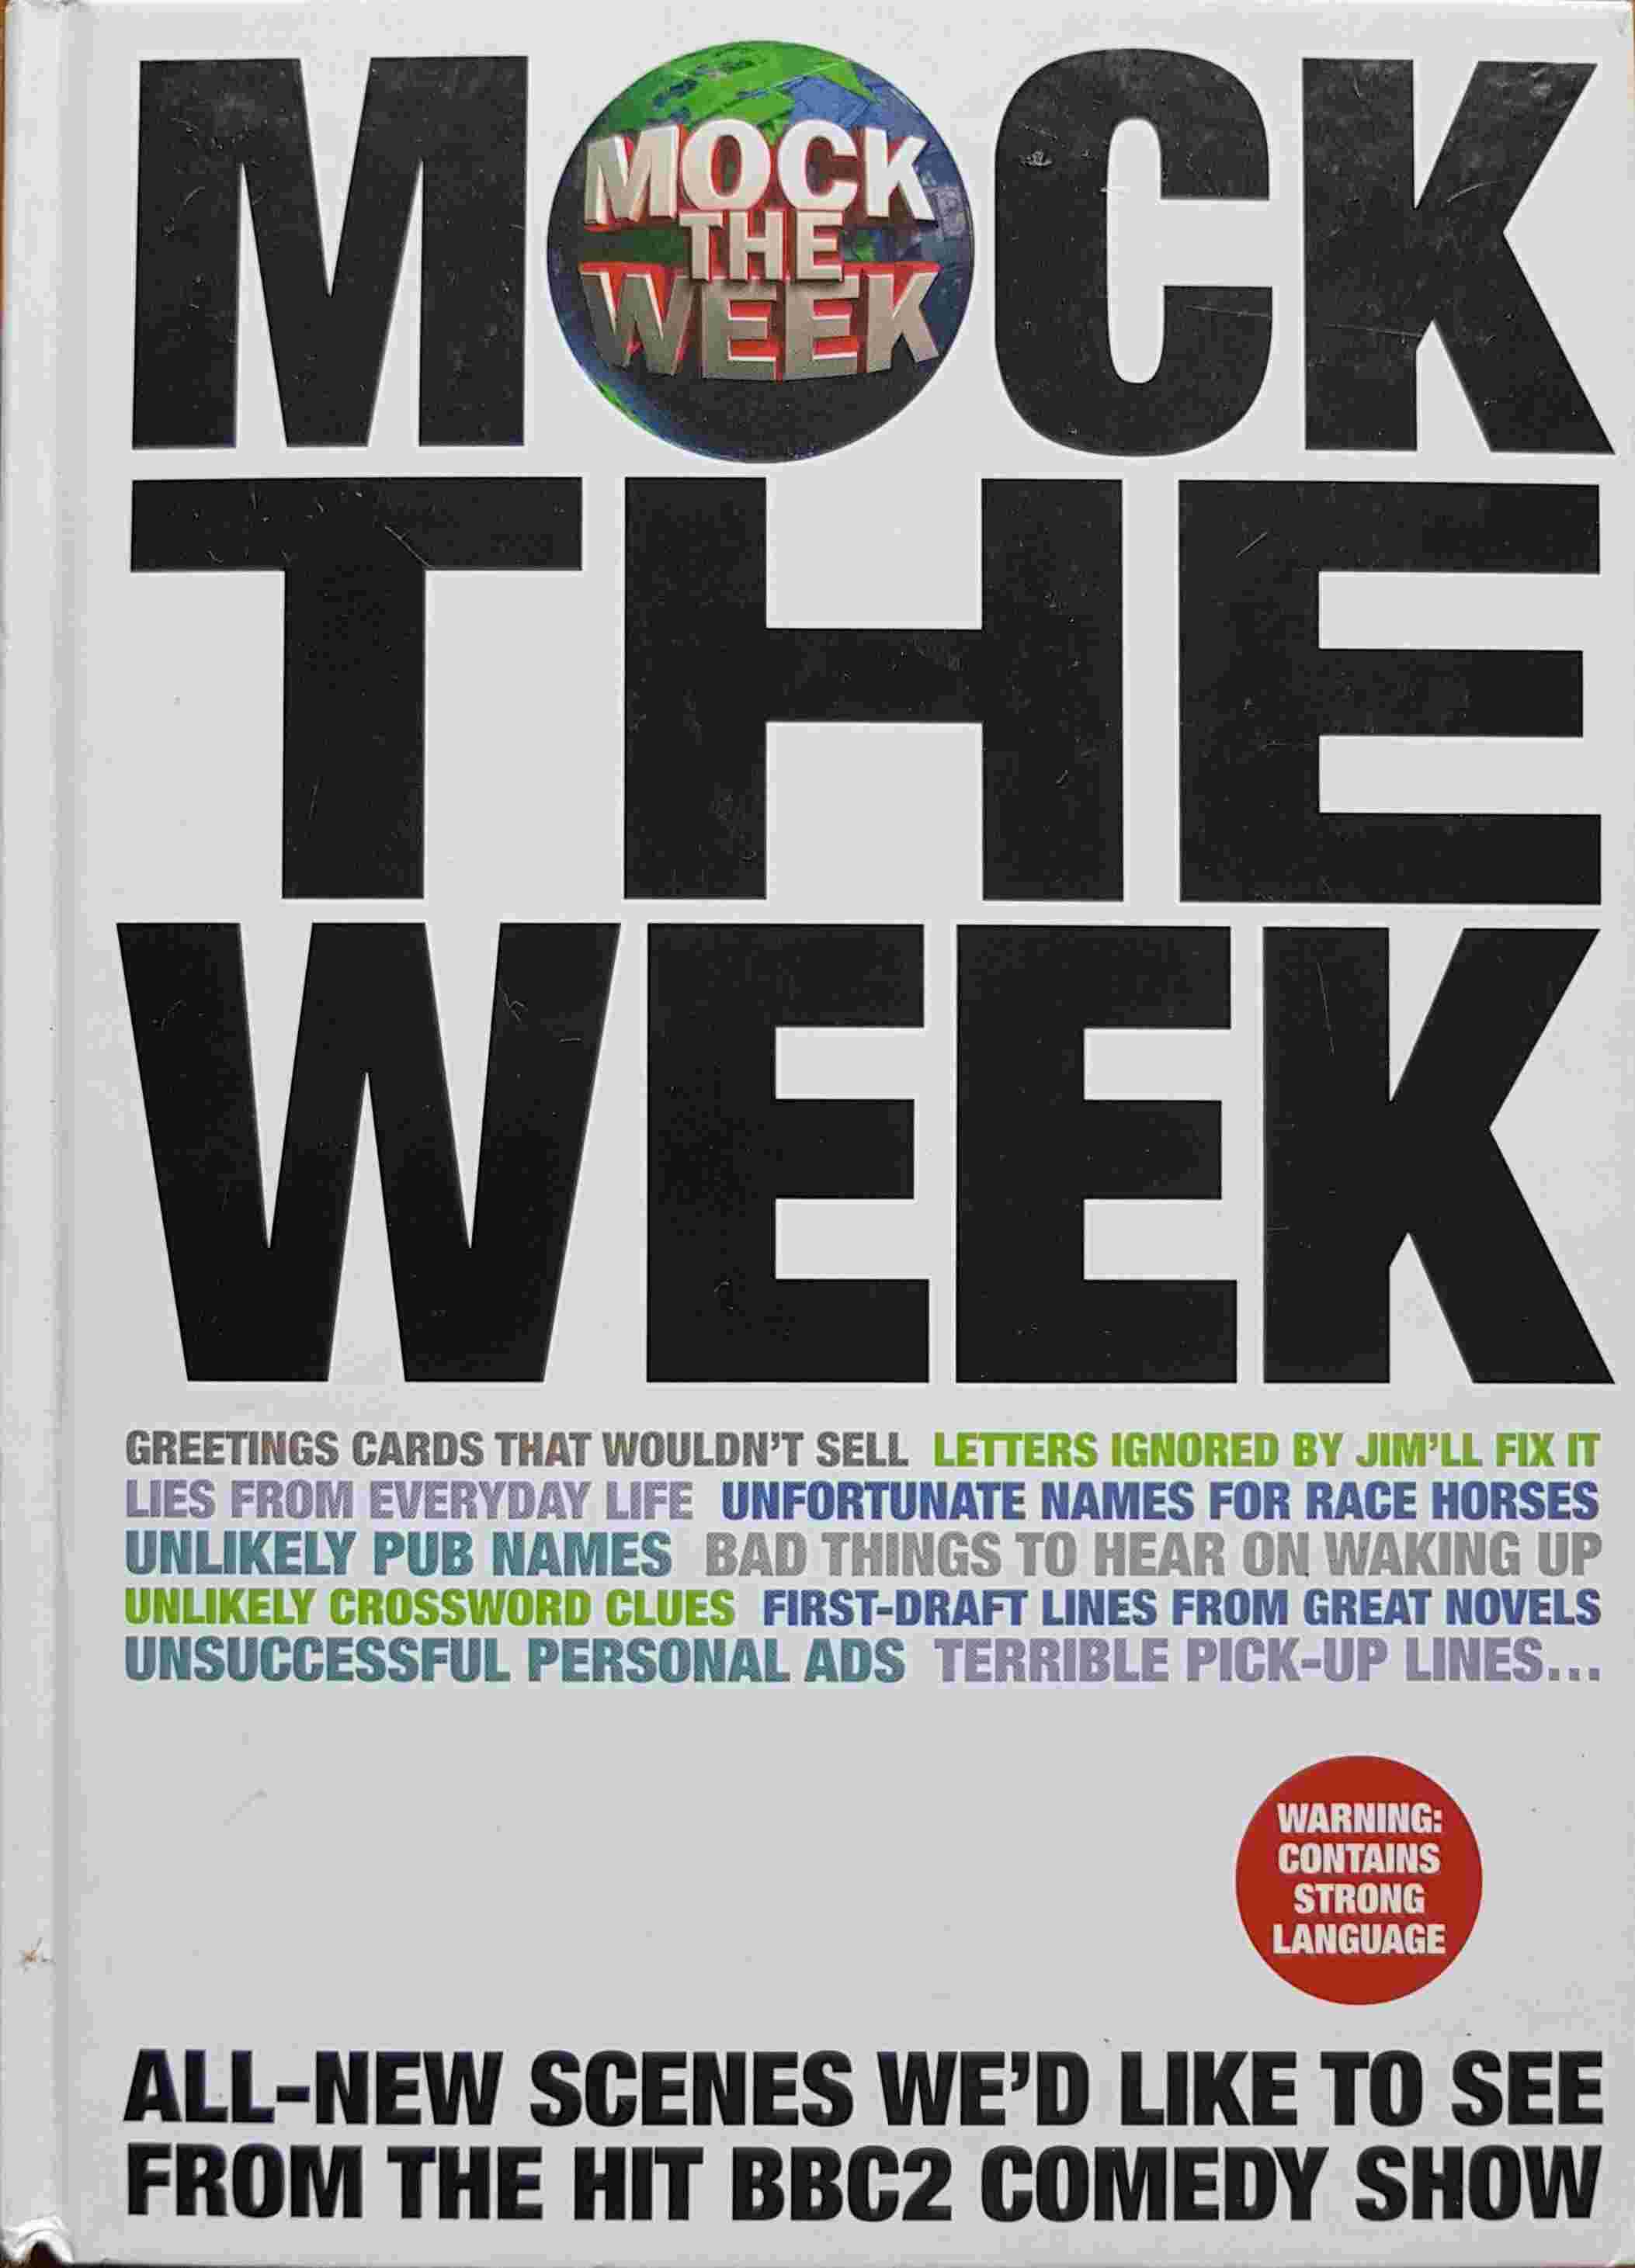 Picture of Mock the week by artist Various from the BBC books - Records and Tapes library